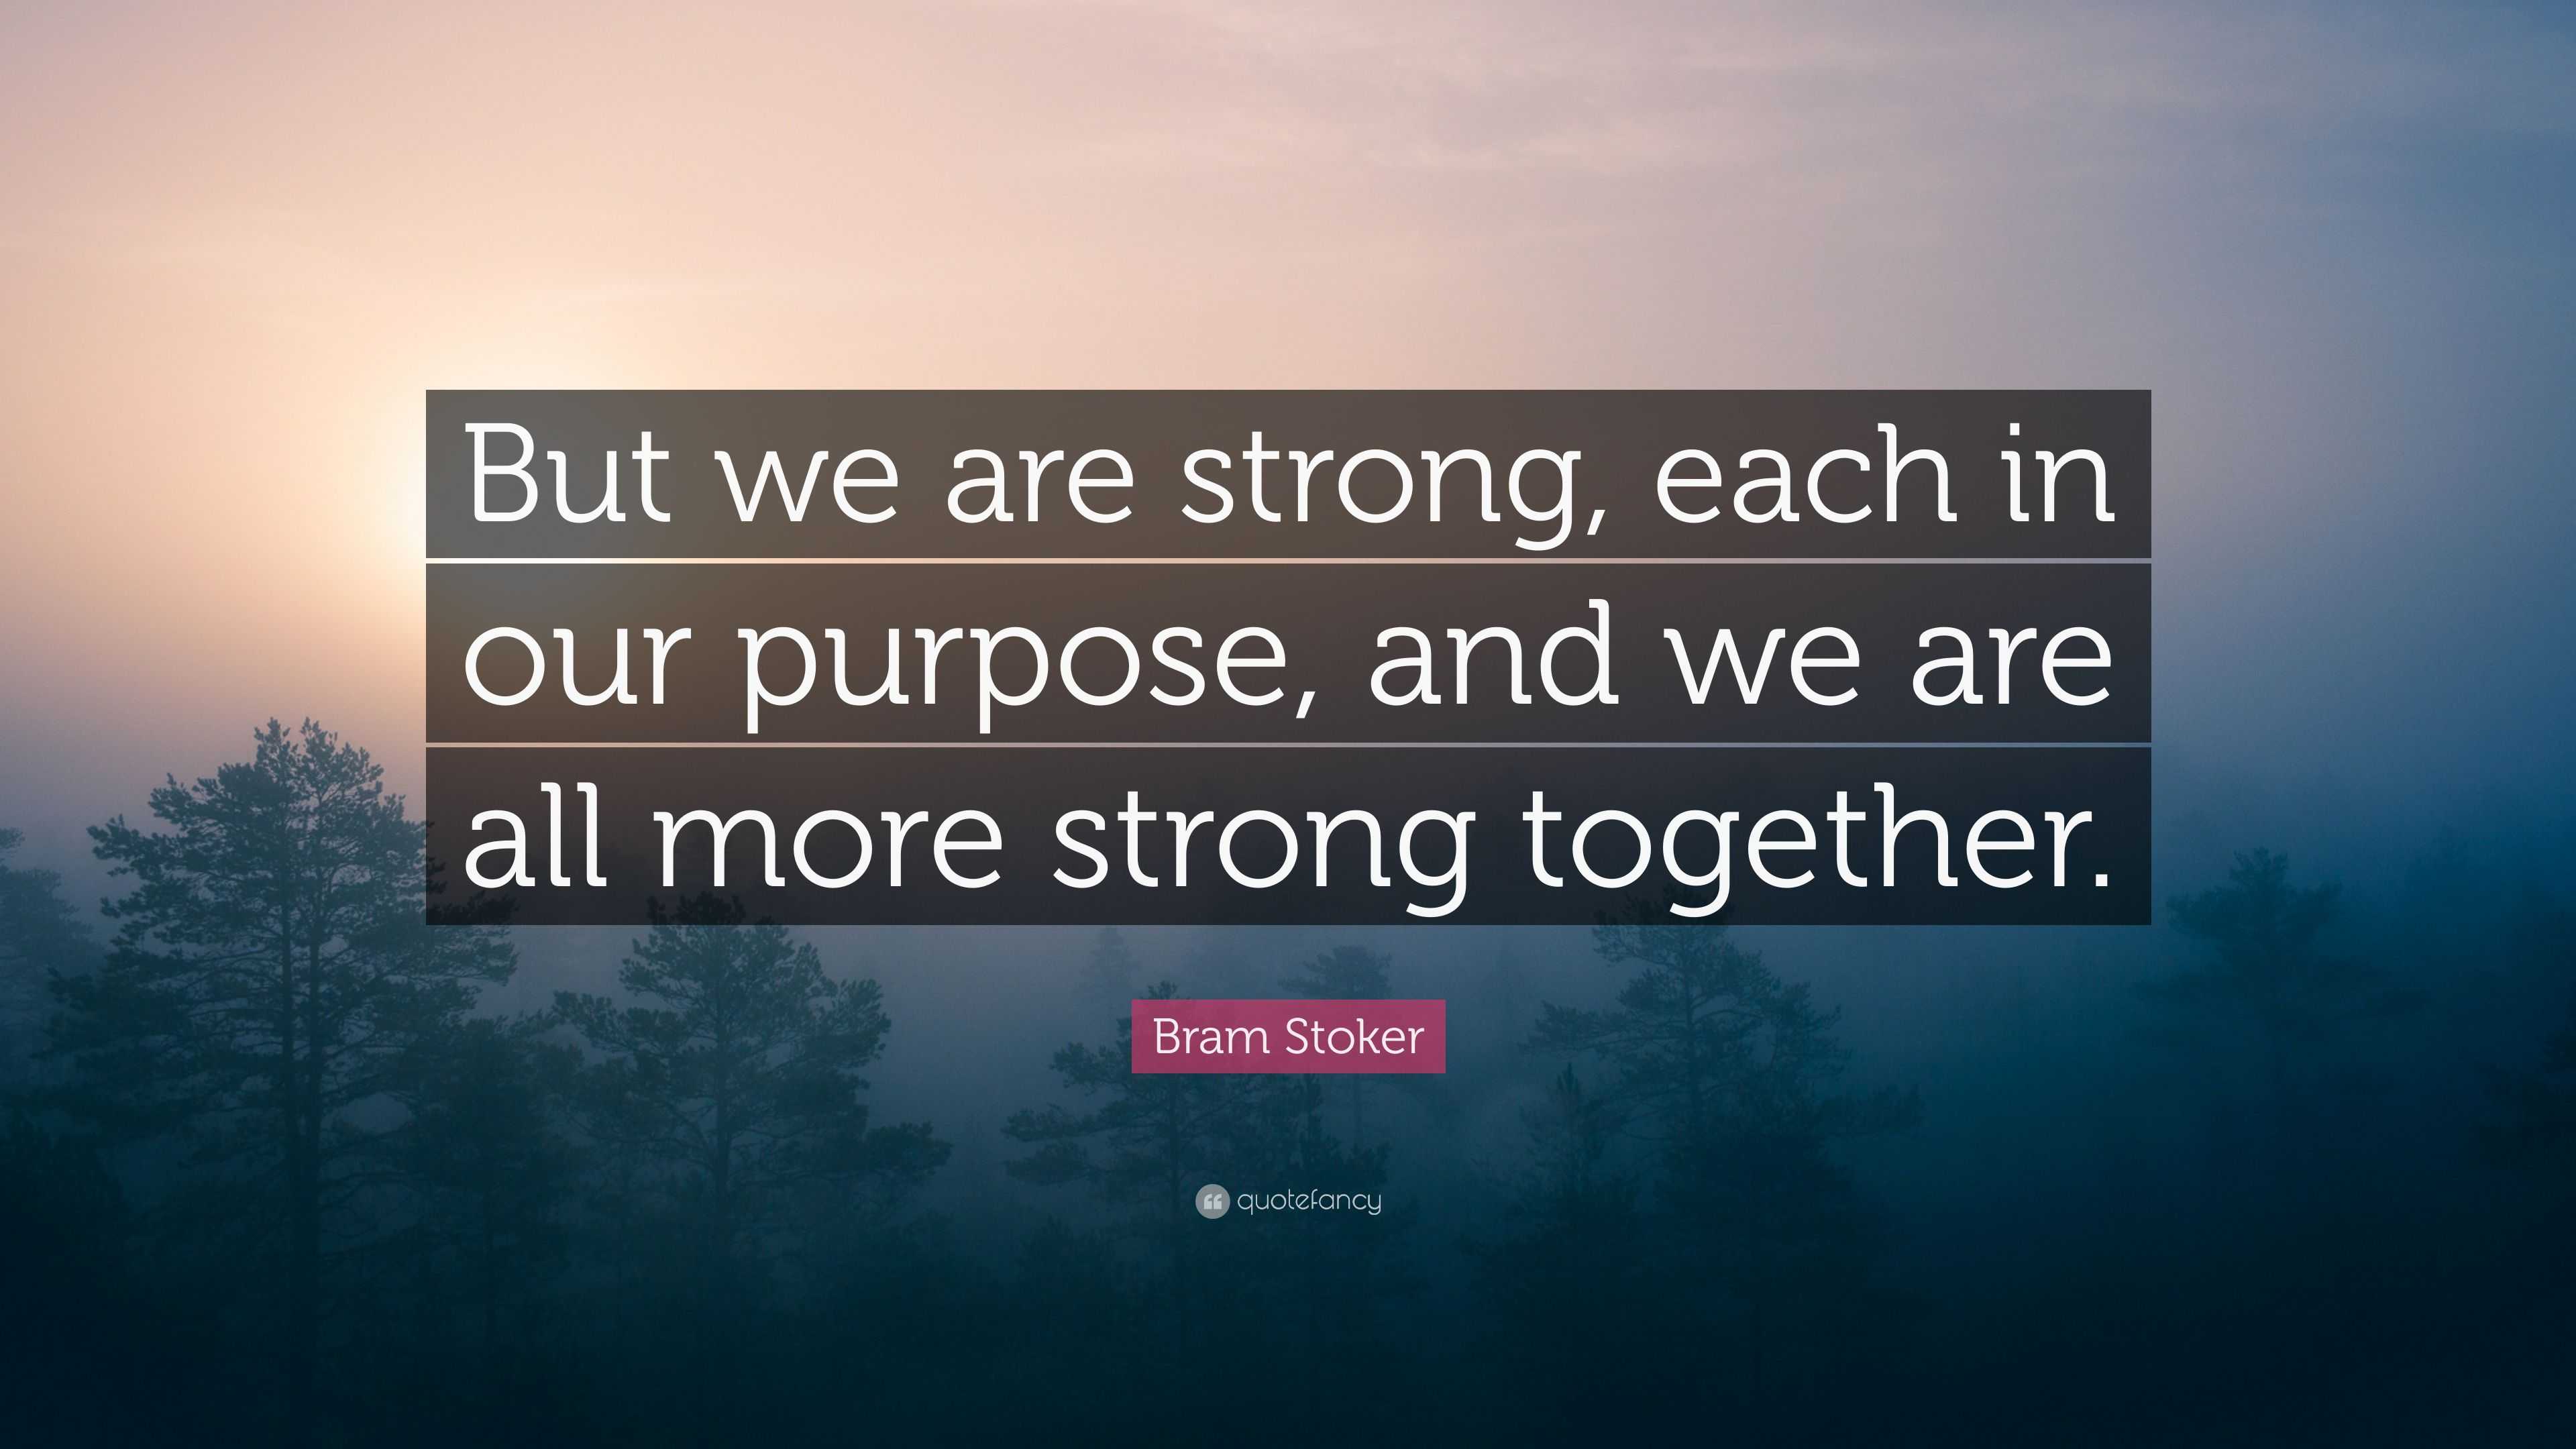 Bram Stoker Quote: "But we are strong, each in our purpose, and we are all more strong together ...